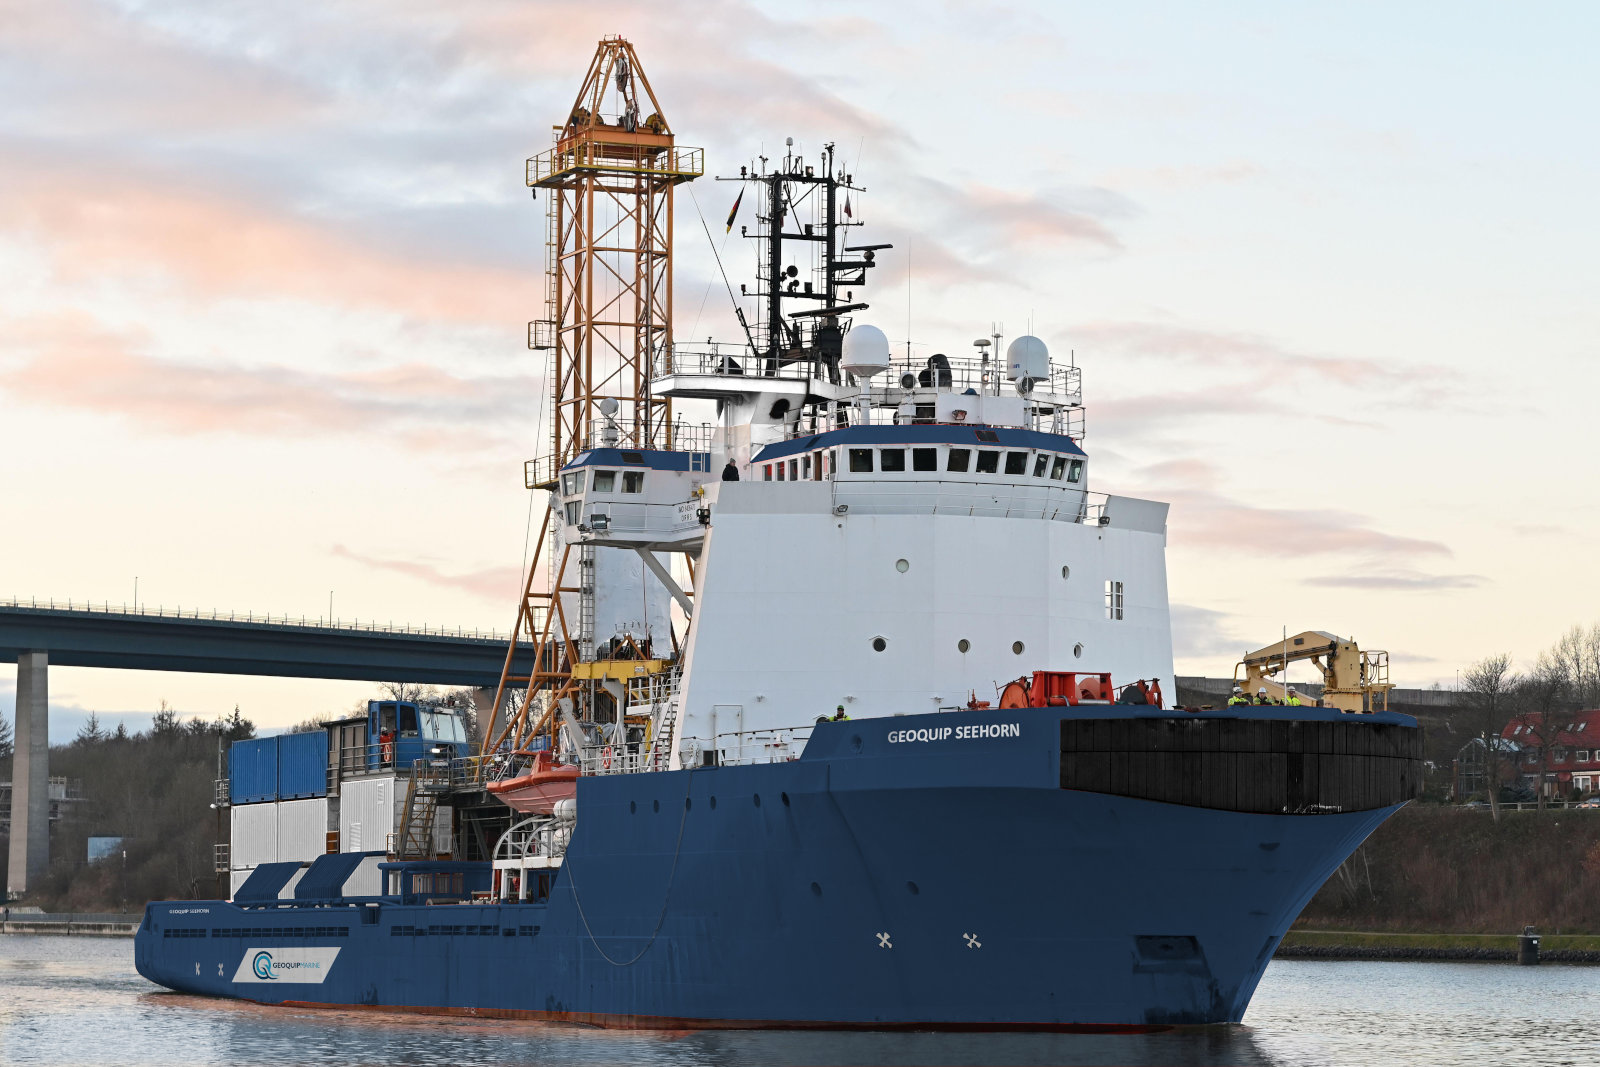 Geoquip Marine takes delivery of the Geoquip Seehorn to add another vessel to its fleet.